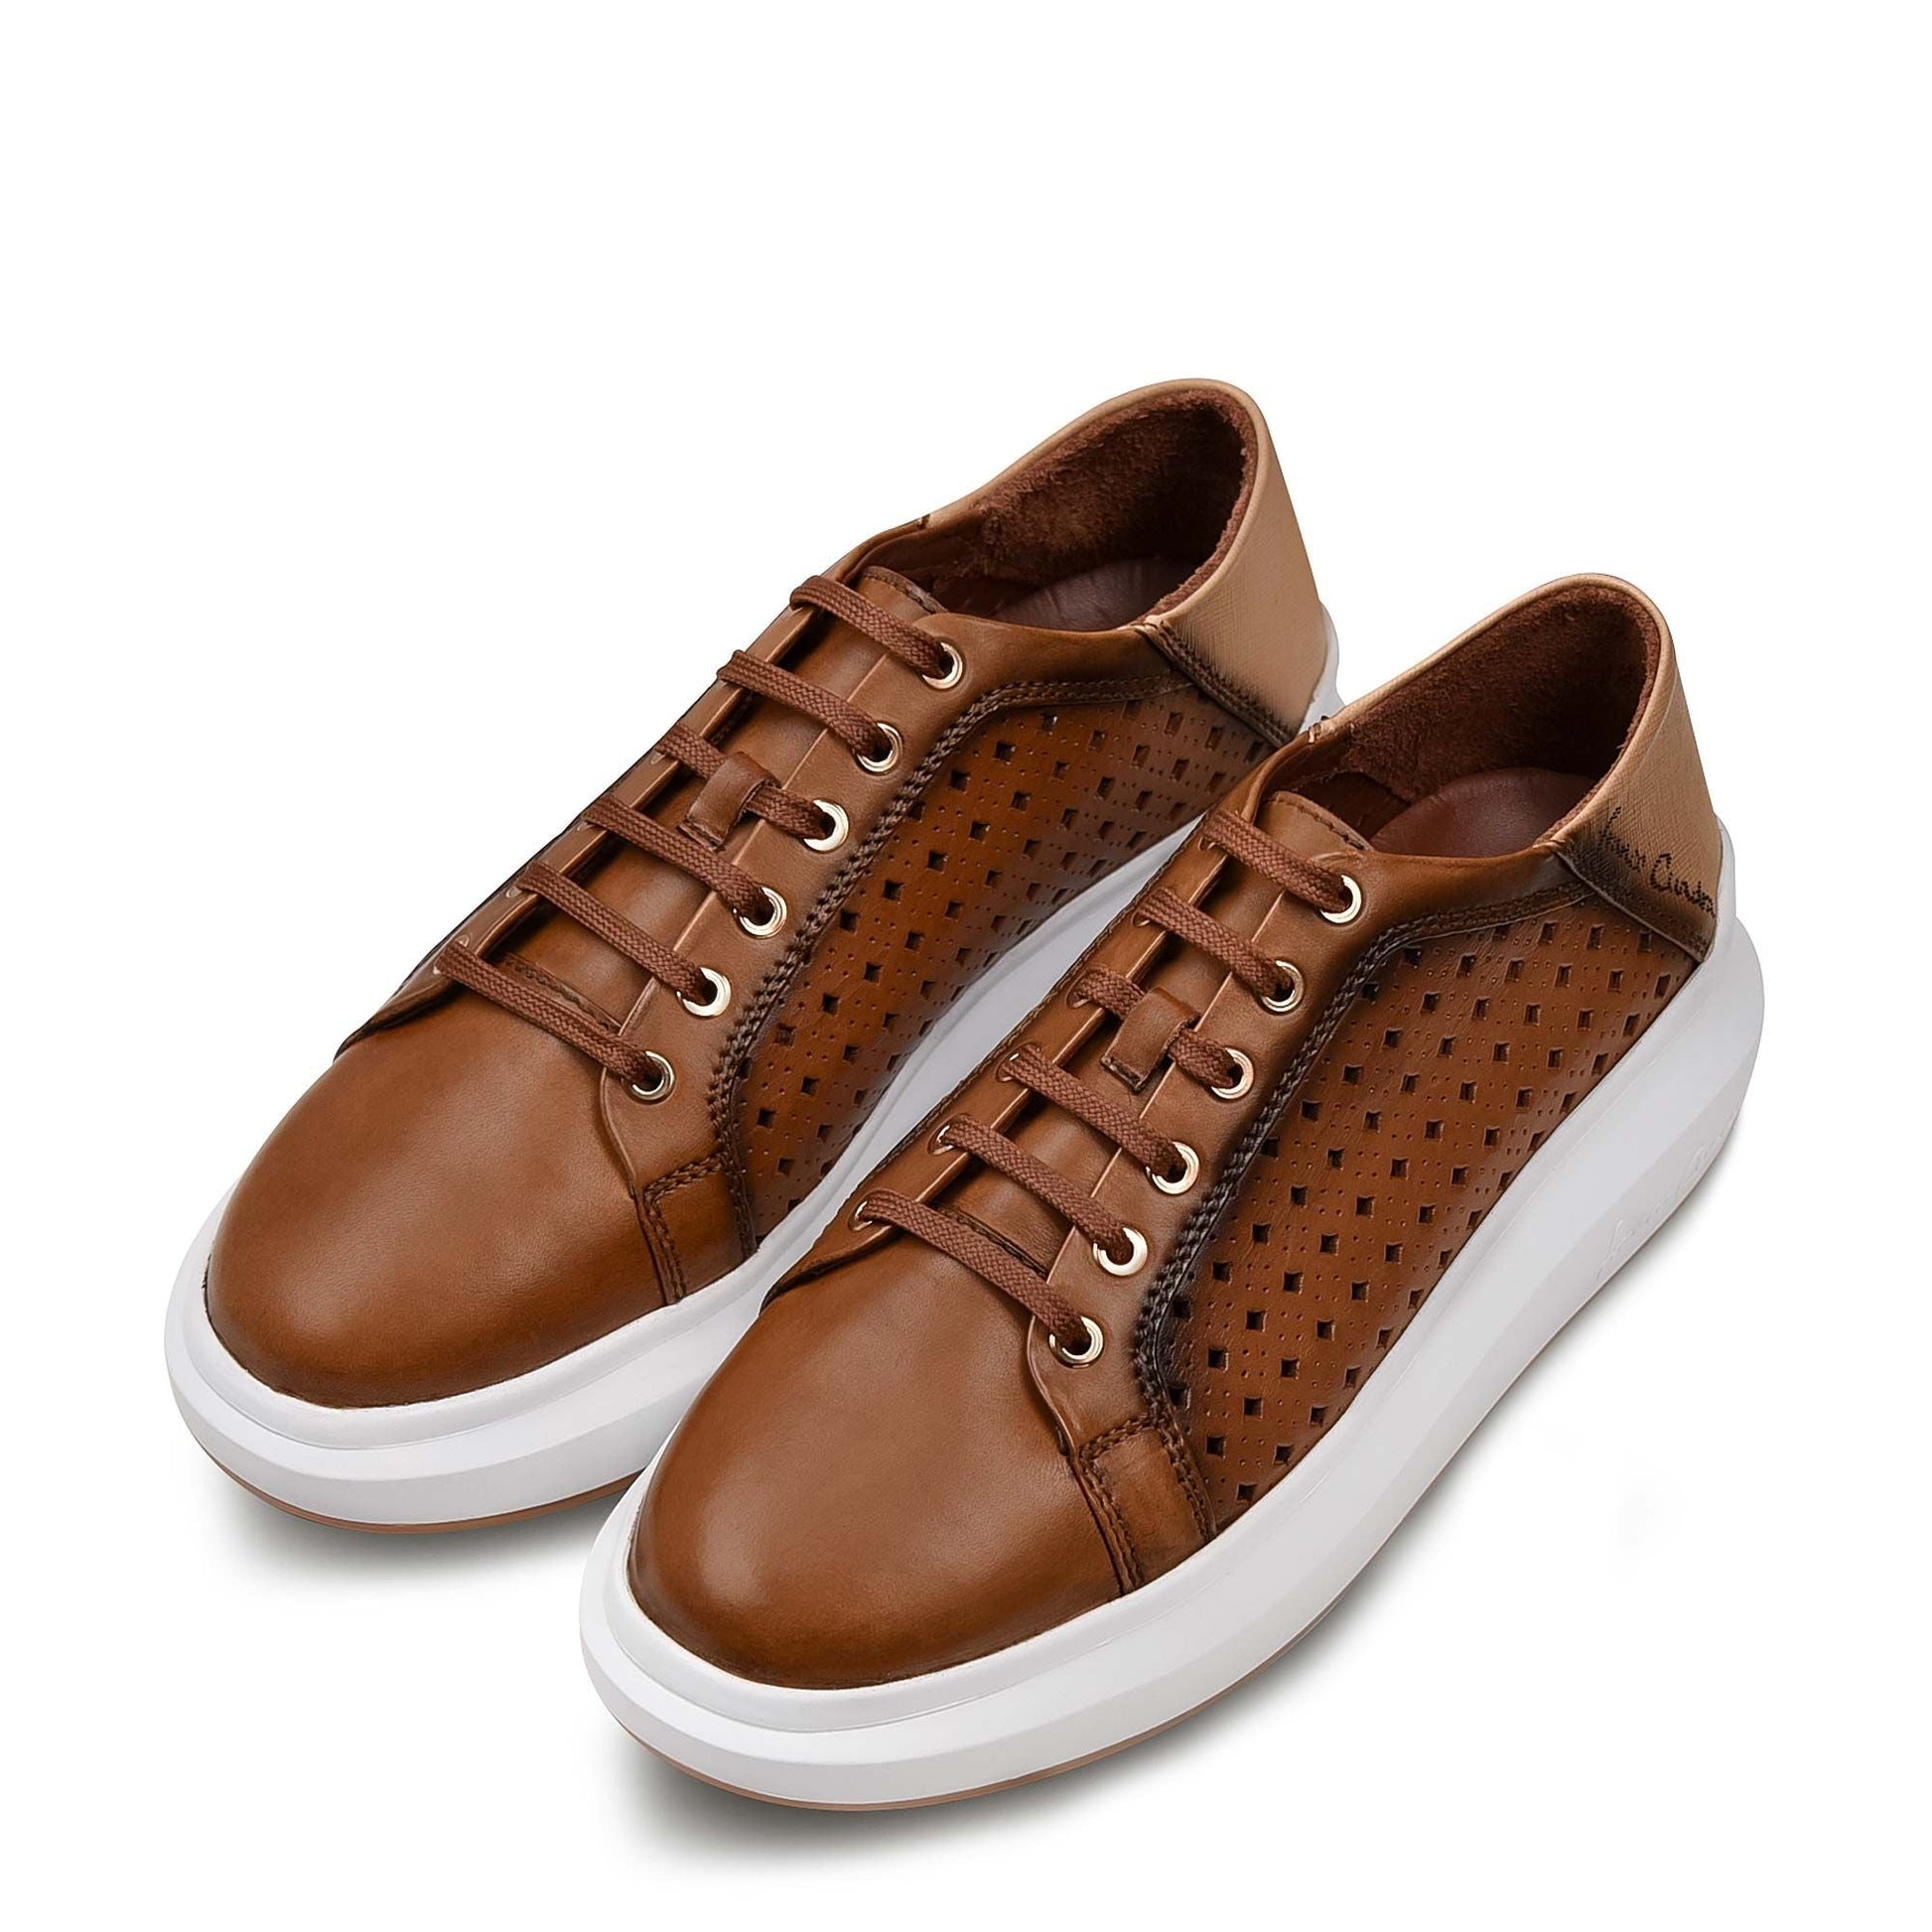 4P6TVDS - Cuadra tan casual fashion leather sneaker shoes for women-Kuet.us